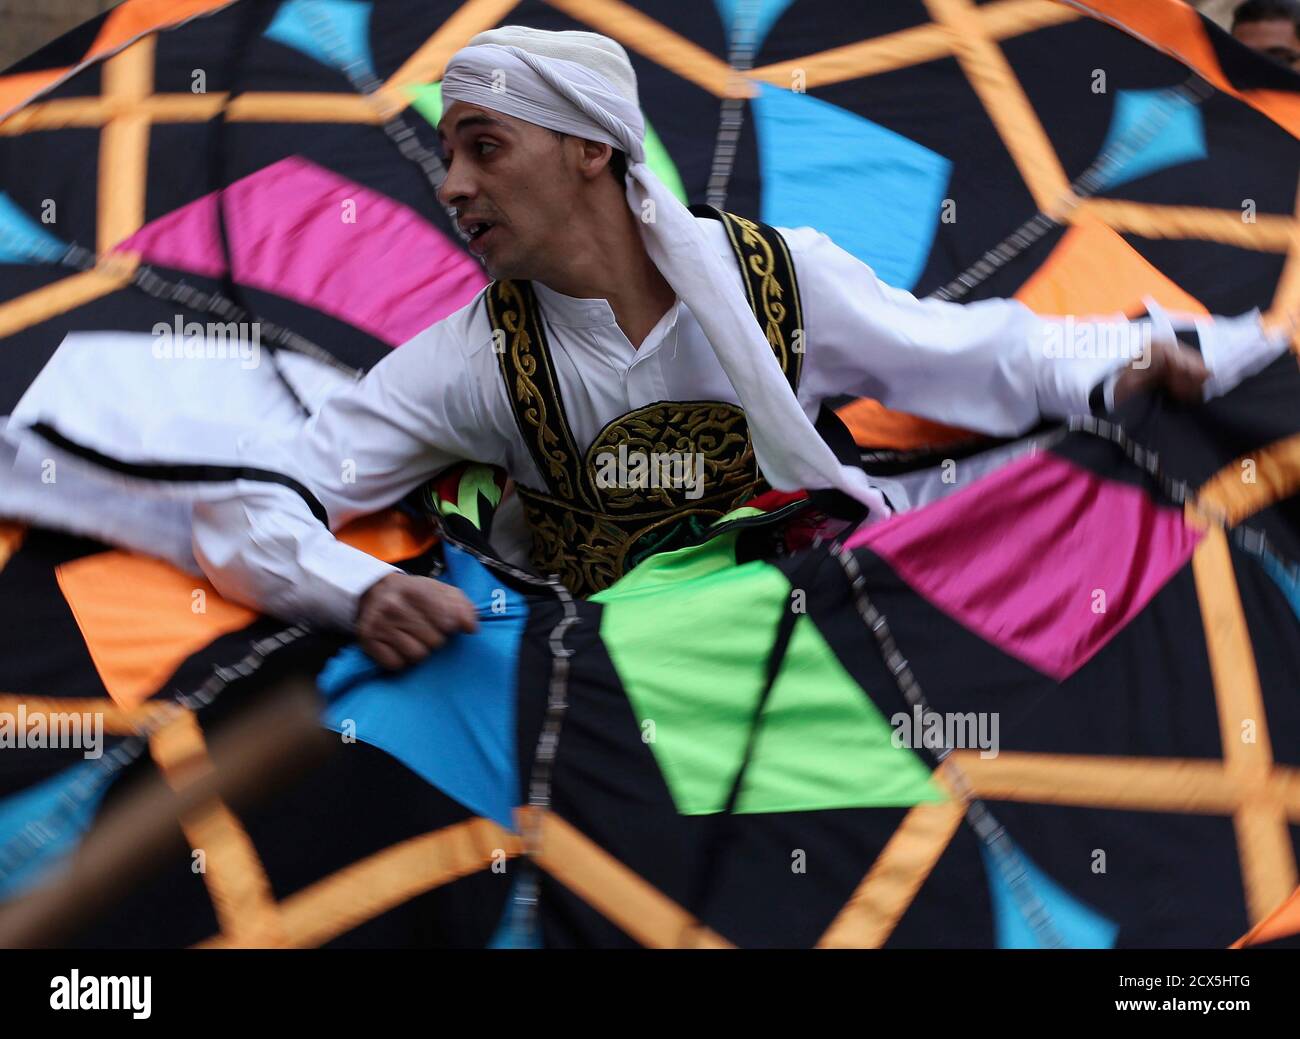 A whirling dervish performs a traditional dance on the famous Al-Moez Street, considered the largest open museum of historical Islamic monuments in Egypt, in Cairo March 16, 2013. REUTERS/Asmaa Waguih (EGYPT - Tags: SOCIETY) Stock Photo